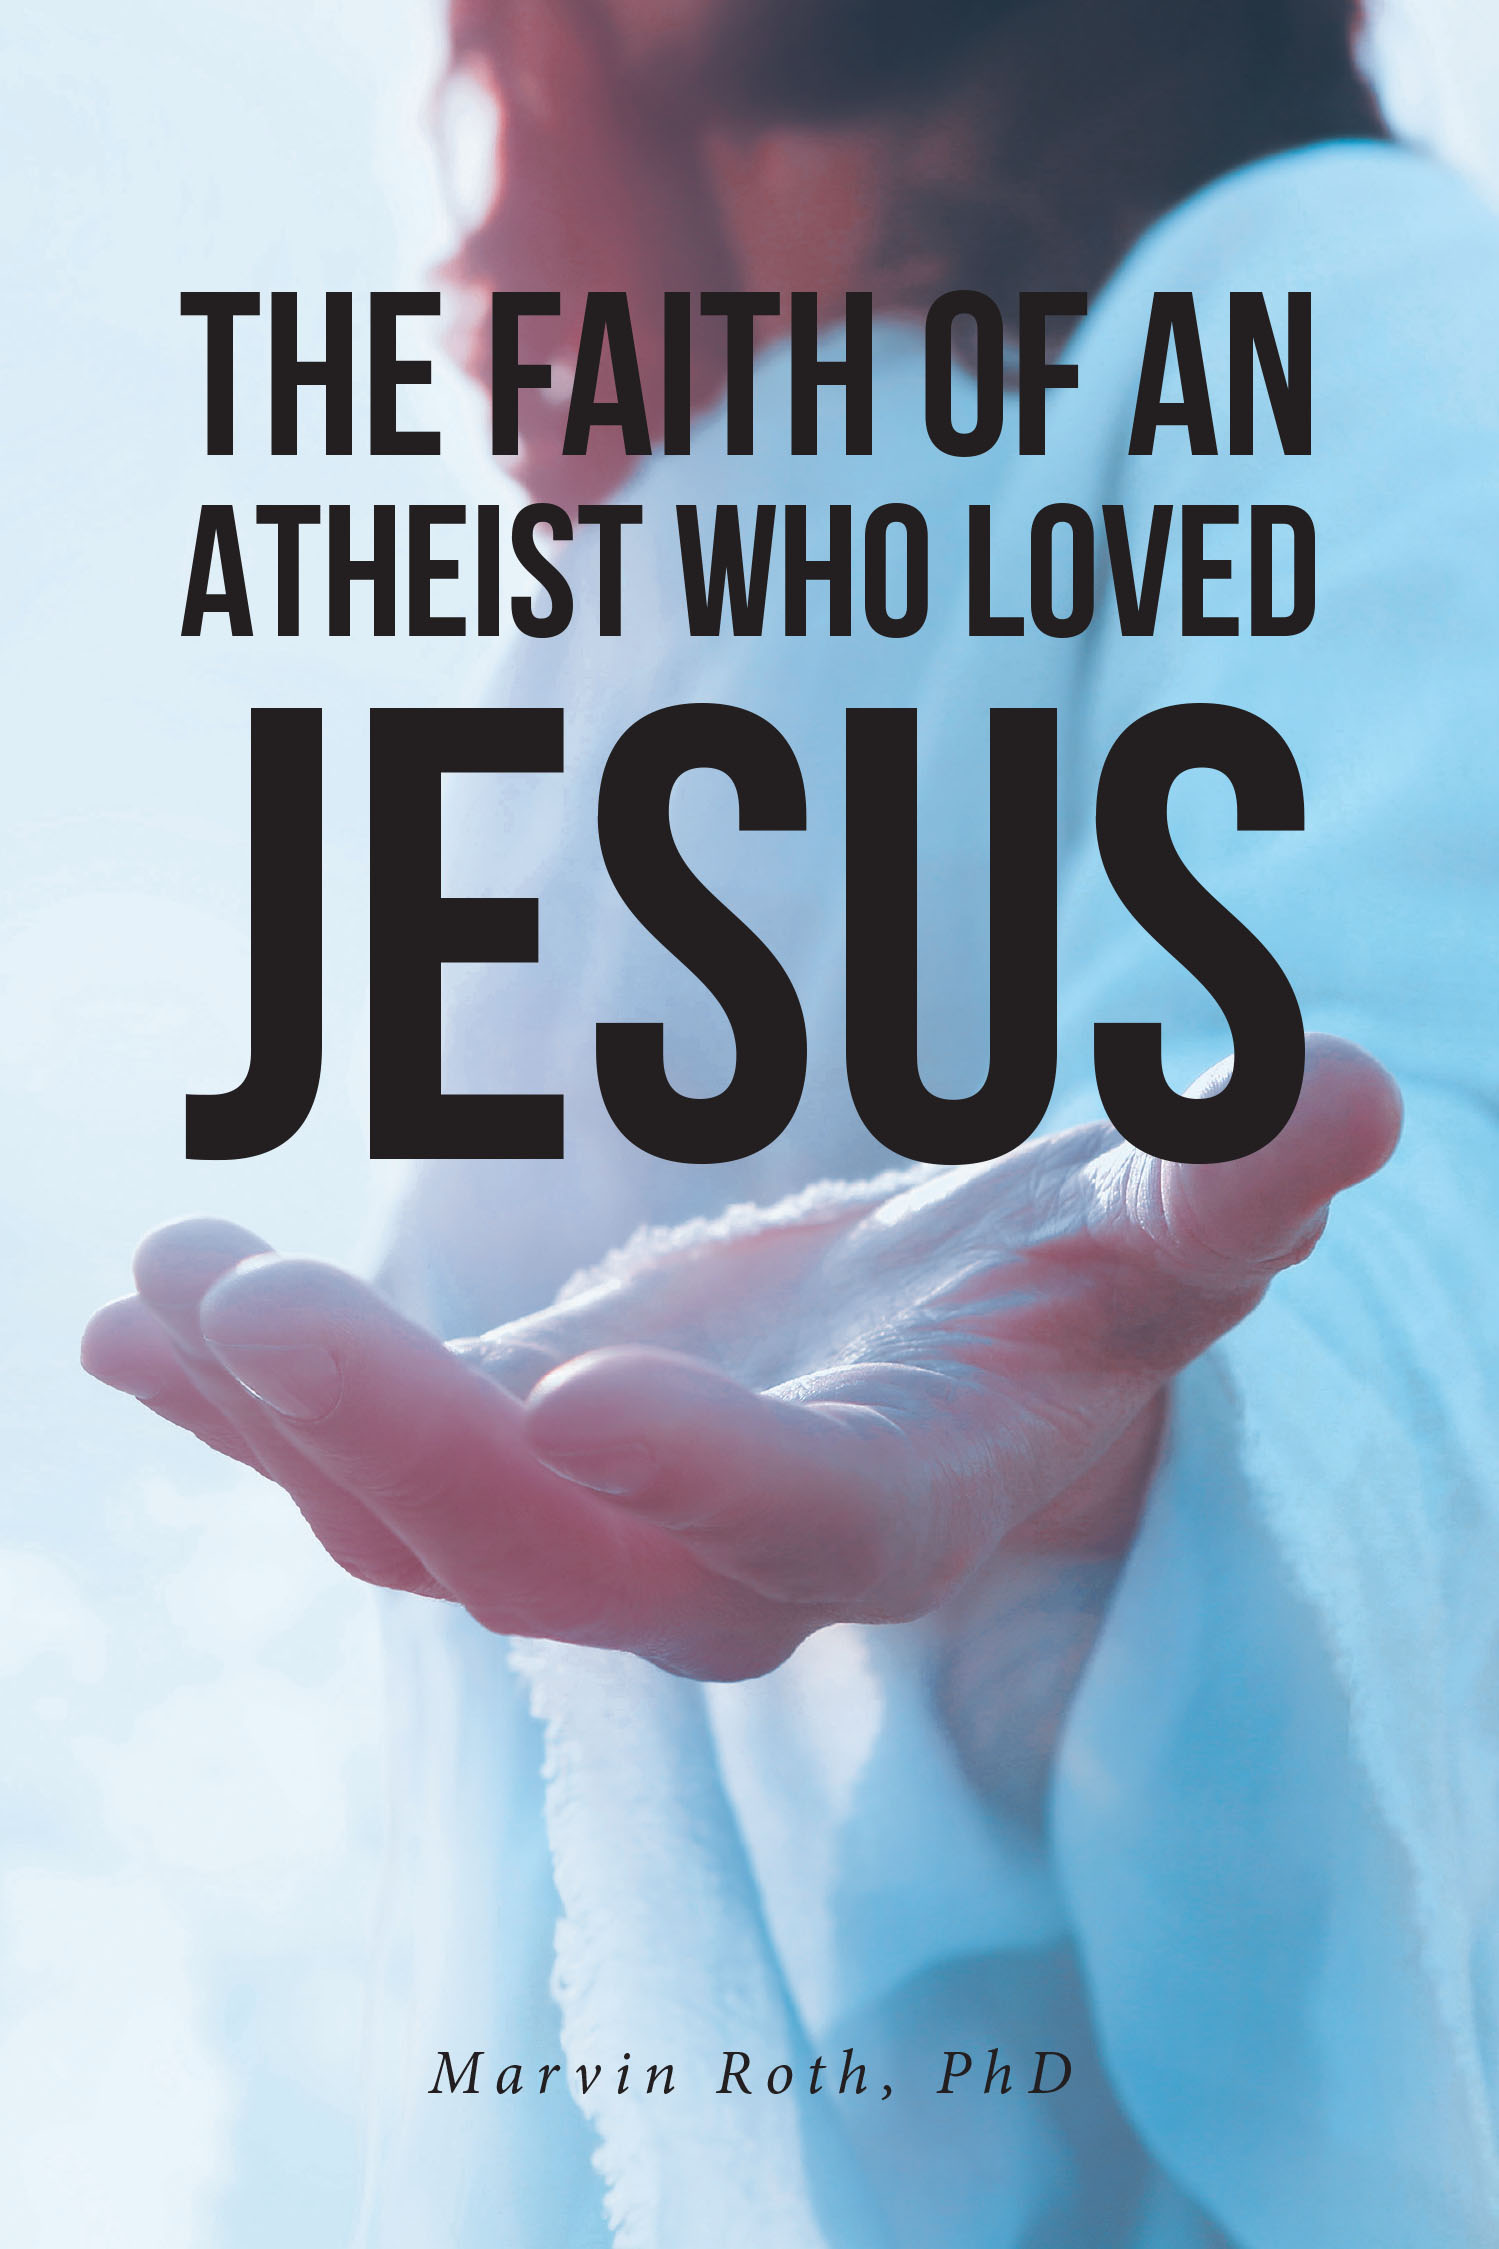 Marvin Roth, PhD’s Newly Released “The Faith Of An Atheist Who Loved Jesus” is a Thought-Provoking Exploration of Foundational Concepts of Faith and Life